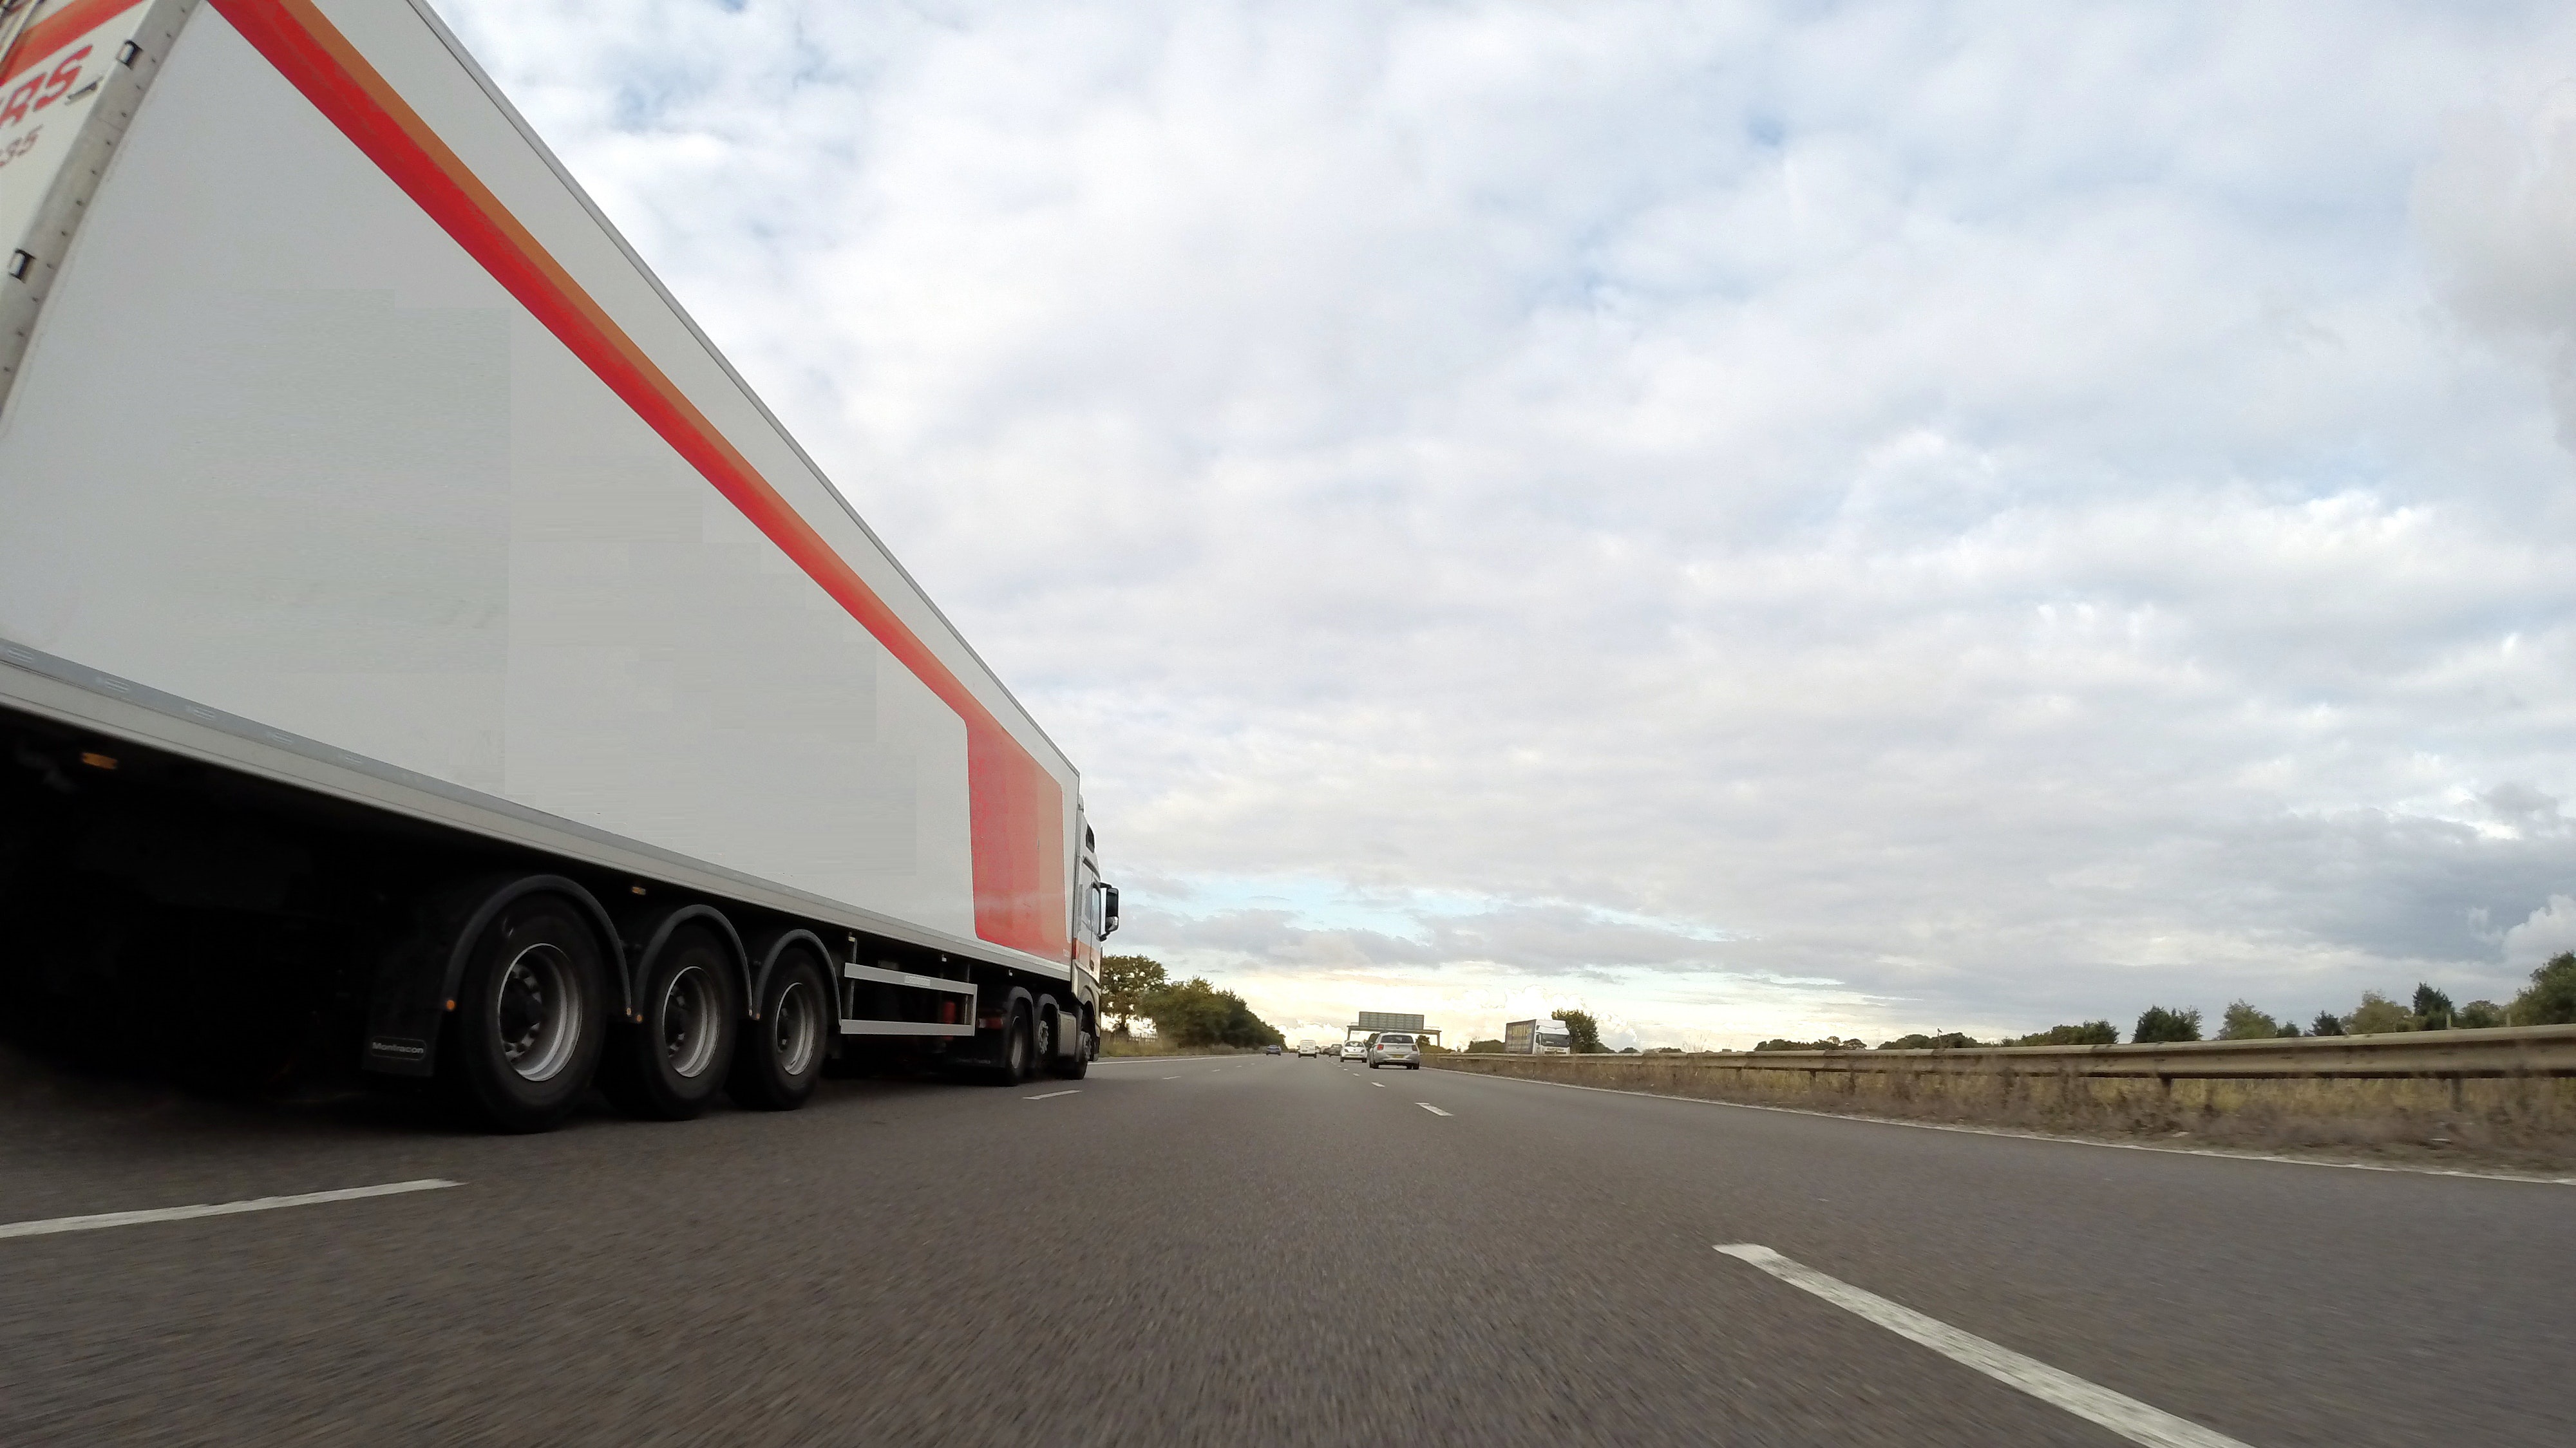 U.S. Cross Border Trucking: Requirements for Highway Carriers